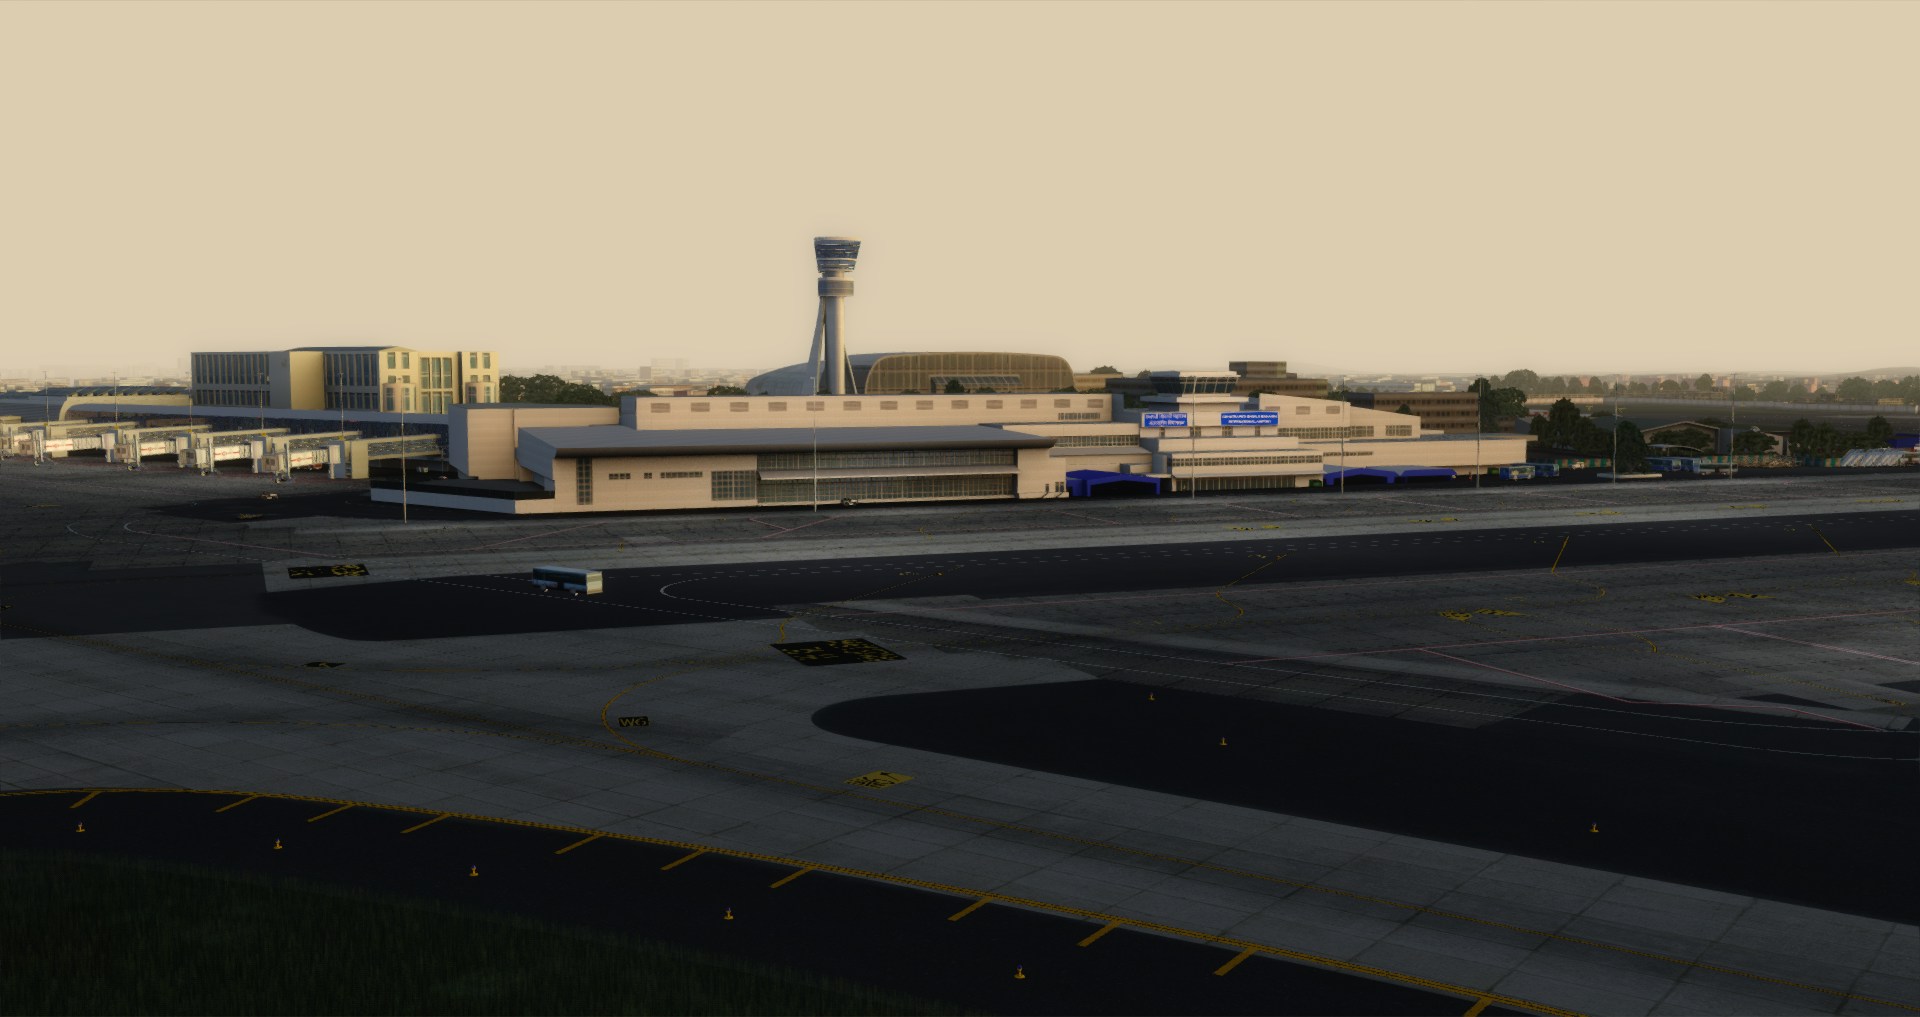 Project Max Releases Mumbai International Airport for P3D